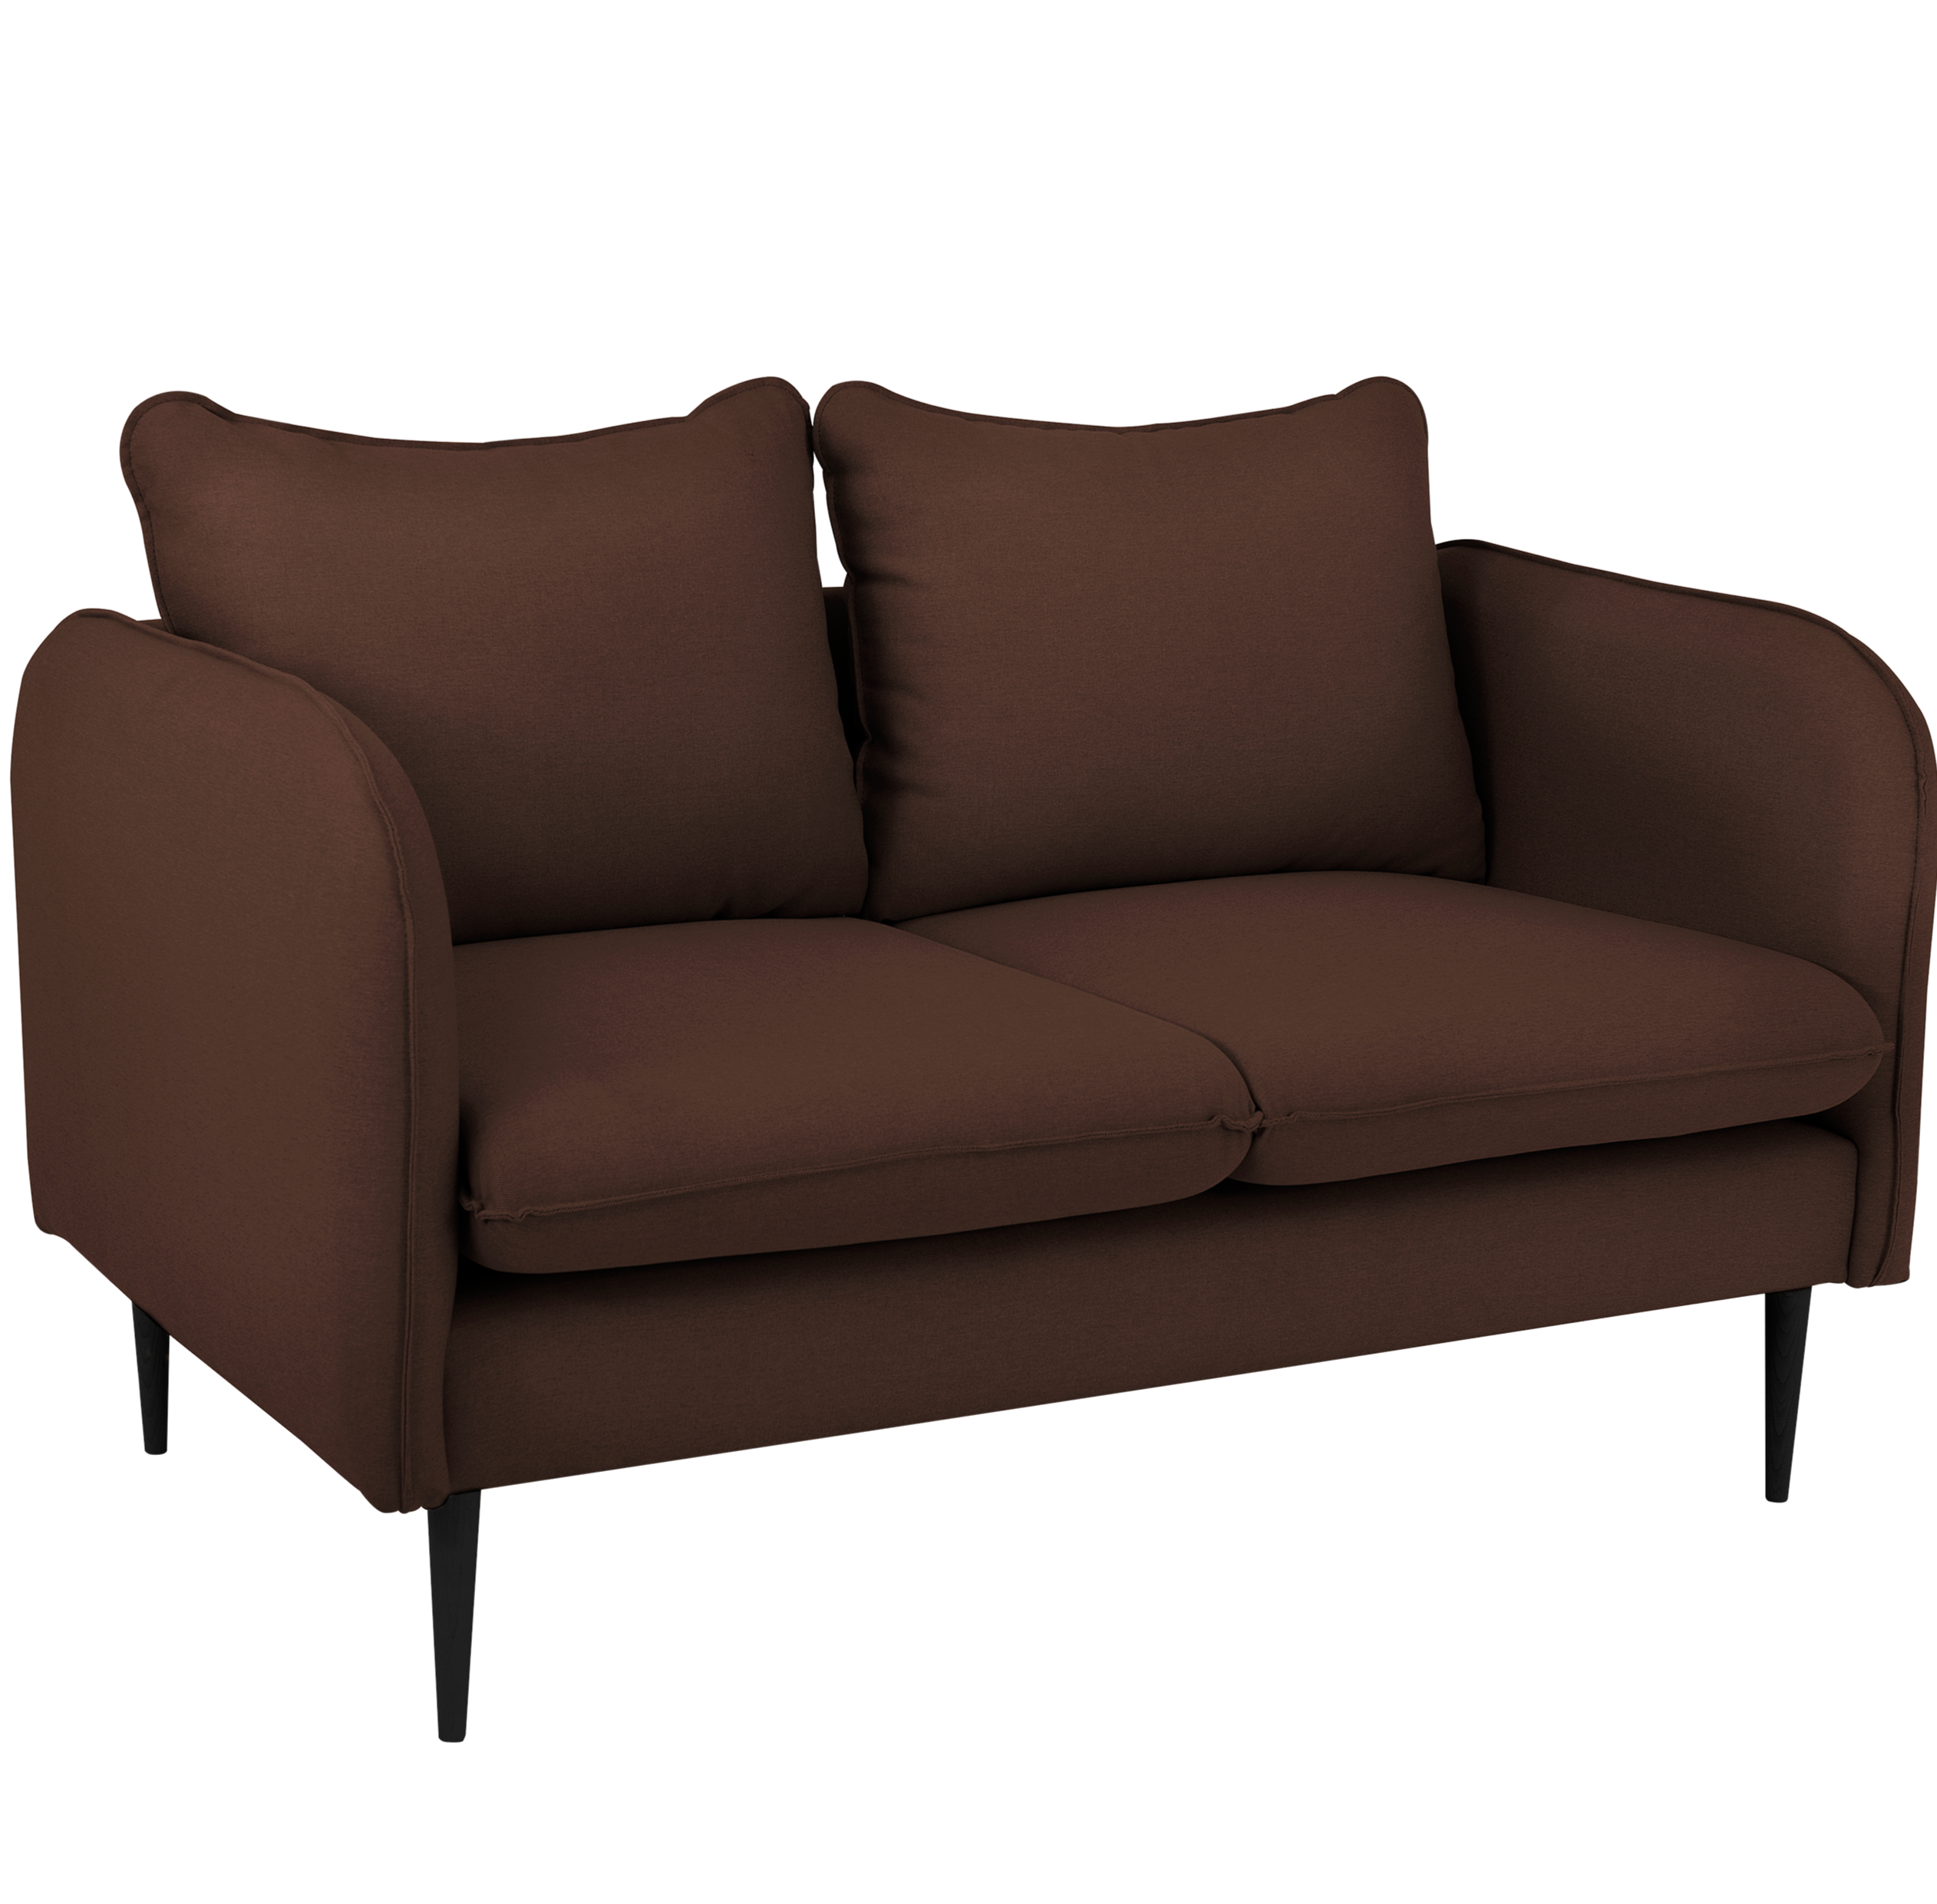 POSH BLACK Sofa 2 Seaters upholstery colour brown